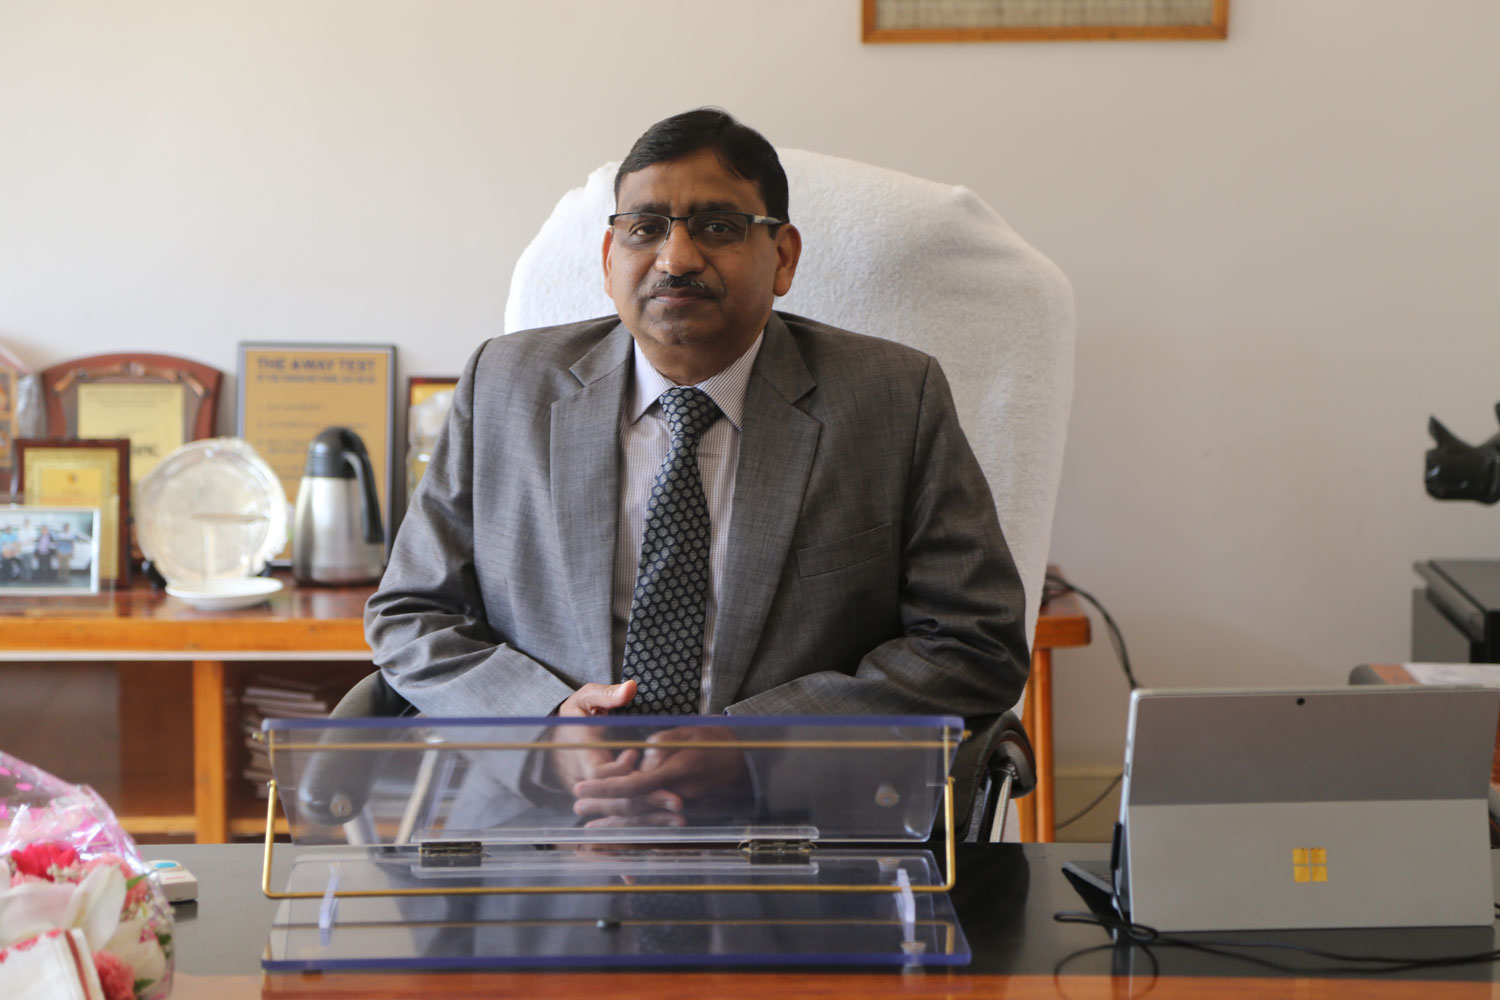 Dr. S.P. Aggarwal took charge as Director, NESAC